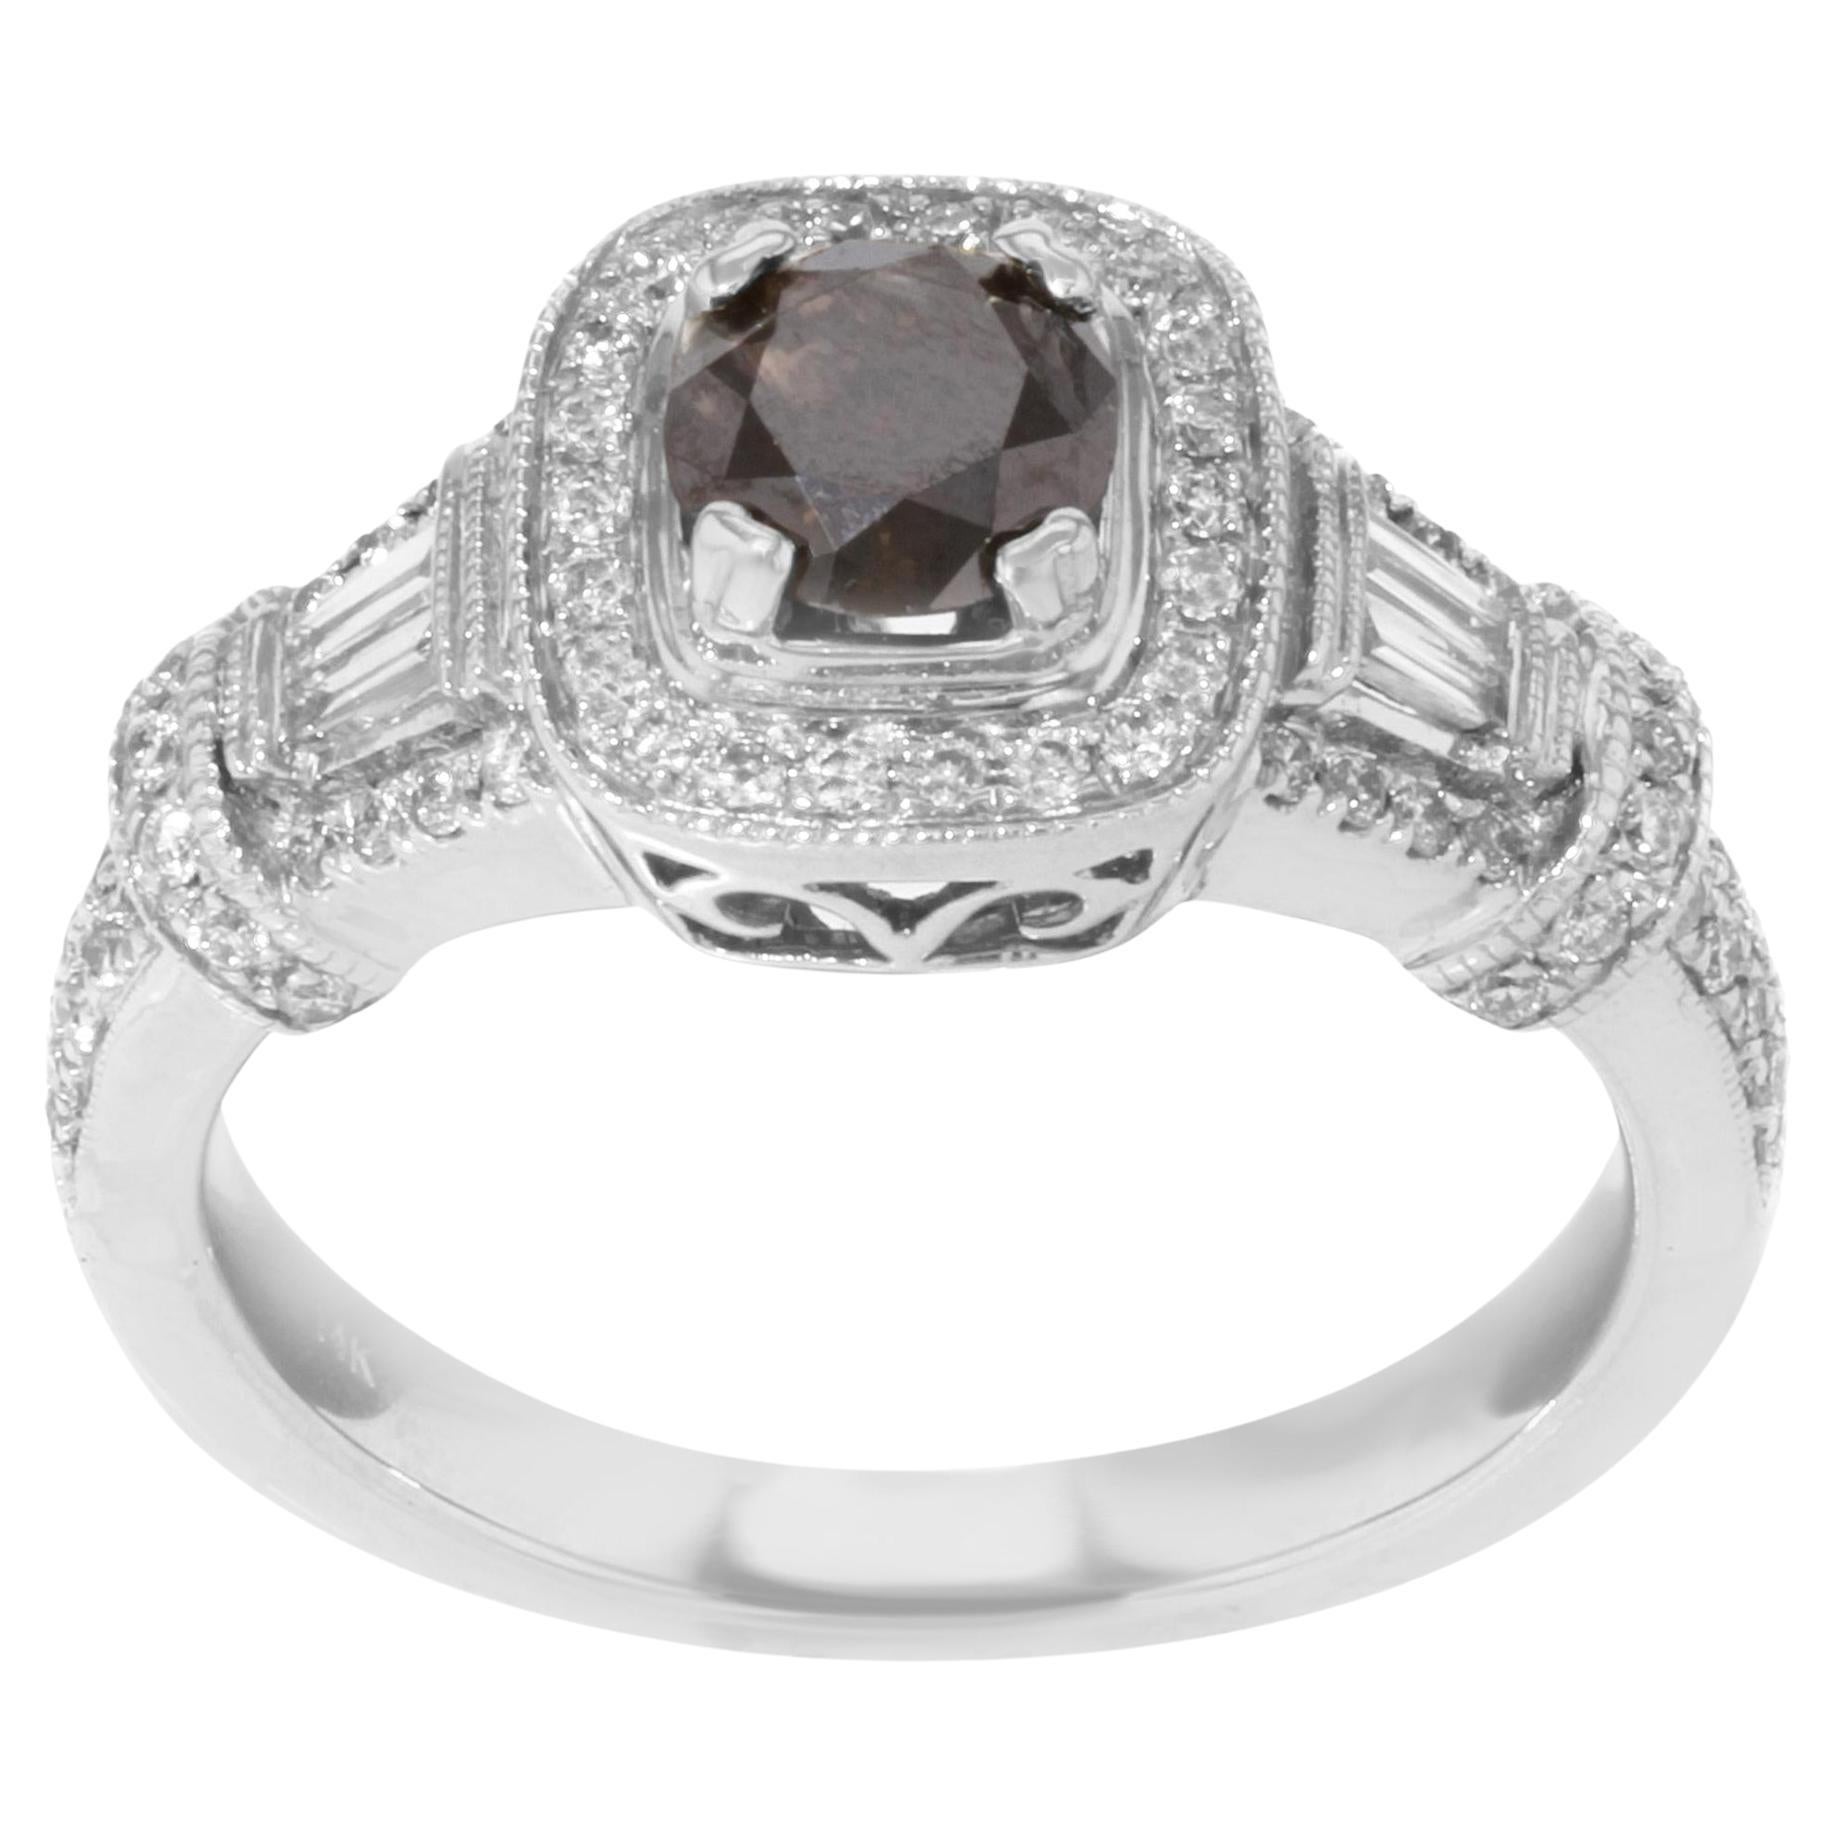 Brown Diamond Accented Ladies Engagement Ring 14K White Gold 1.84 Cttw